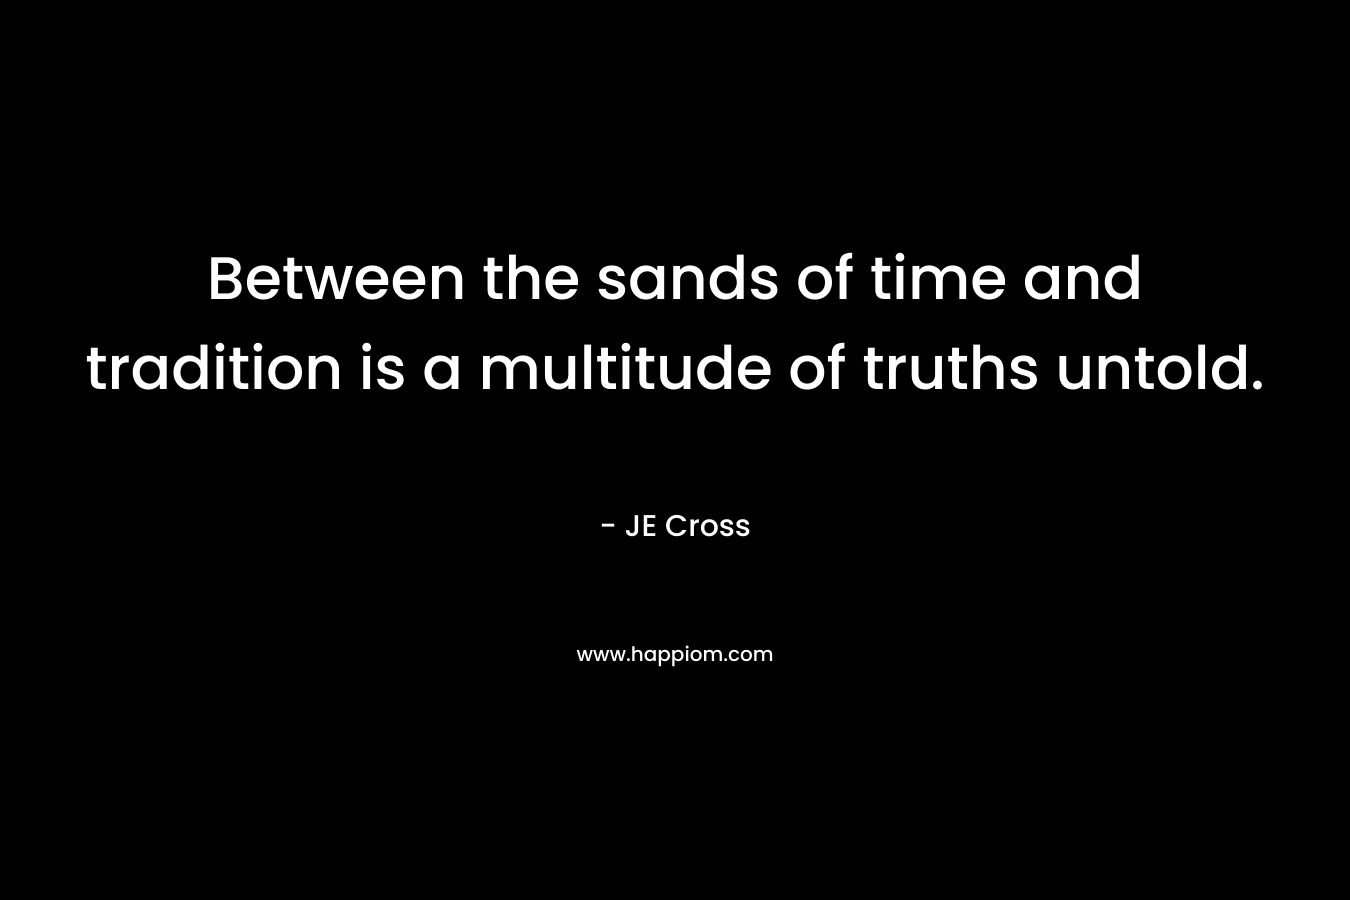 Between the sands of time and tradition is a multitude of truths untold. – JE Cross